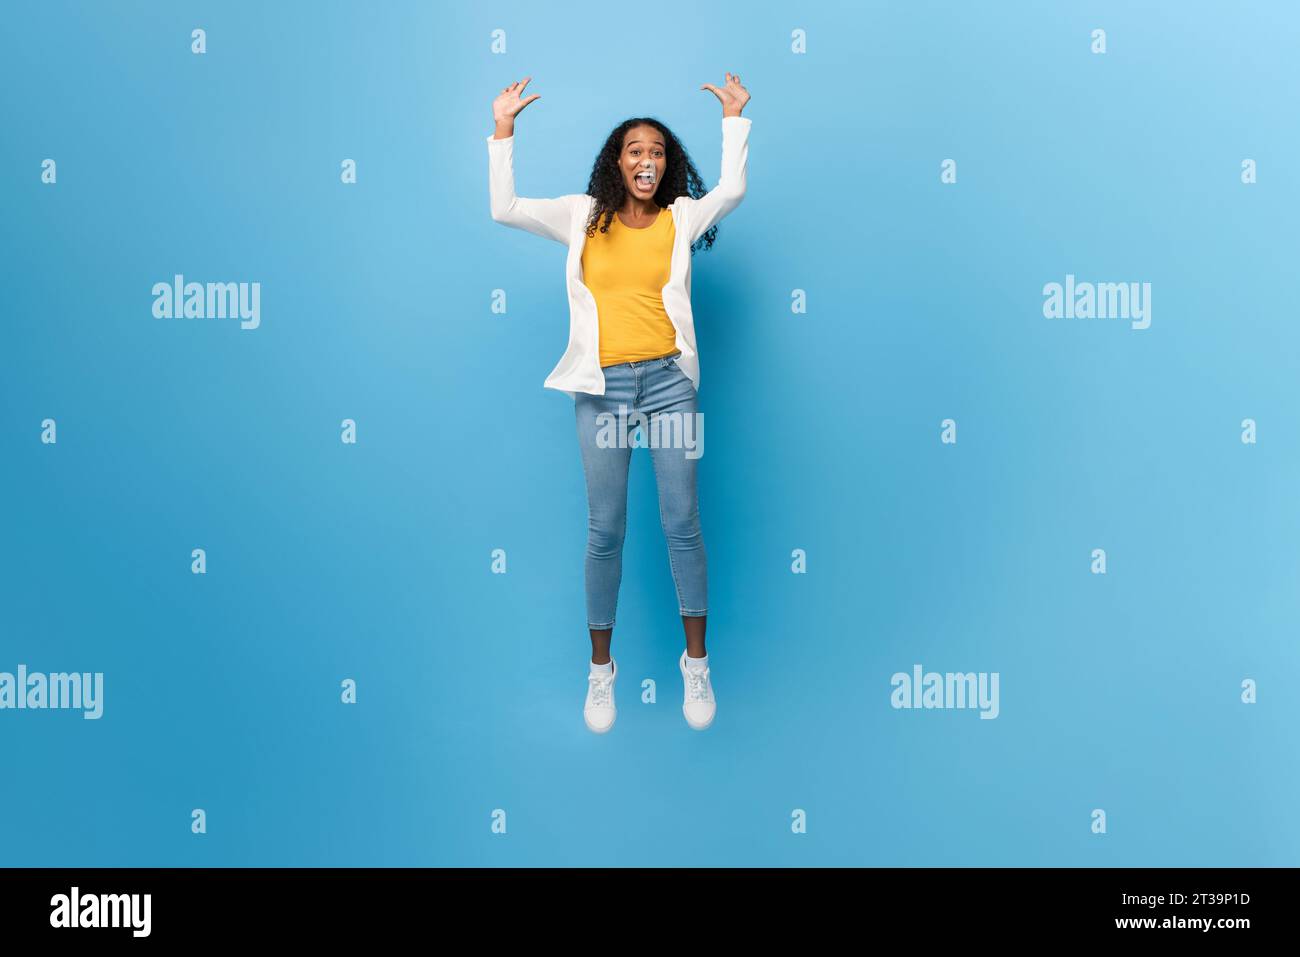 Full length portrait of smiling ecstatic African American woman jumping with arms raised in isolated light blue color studio background Stock Photo